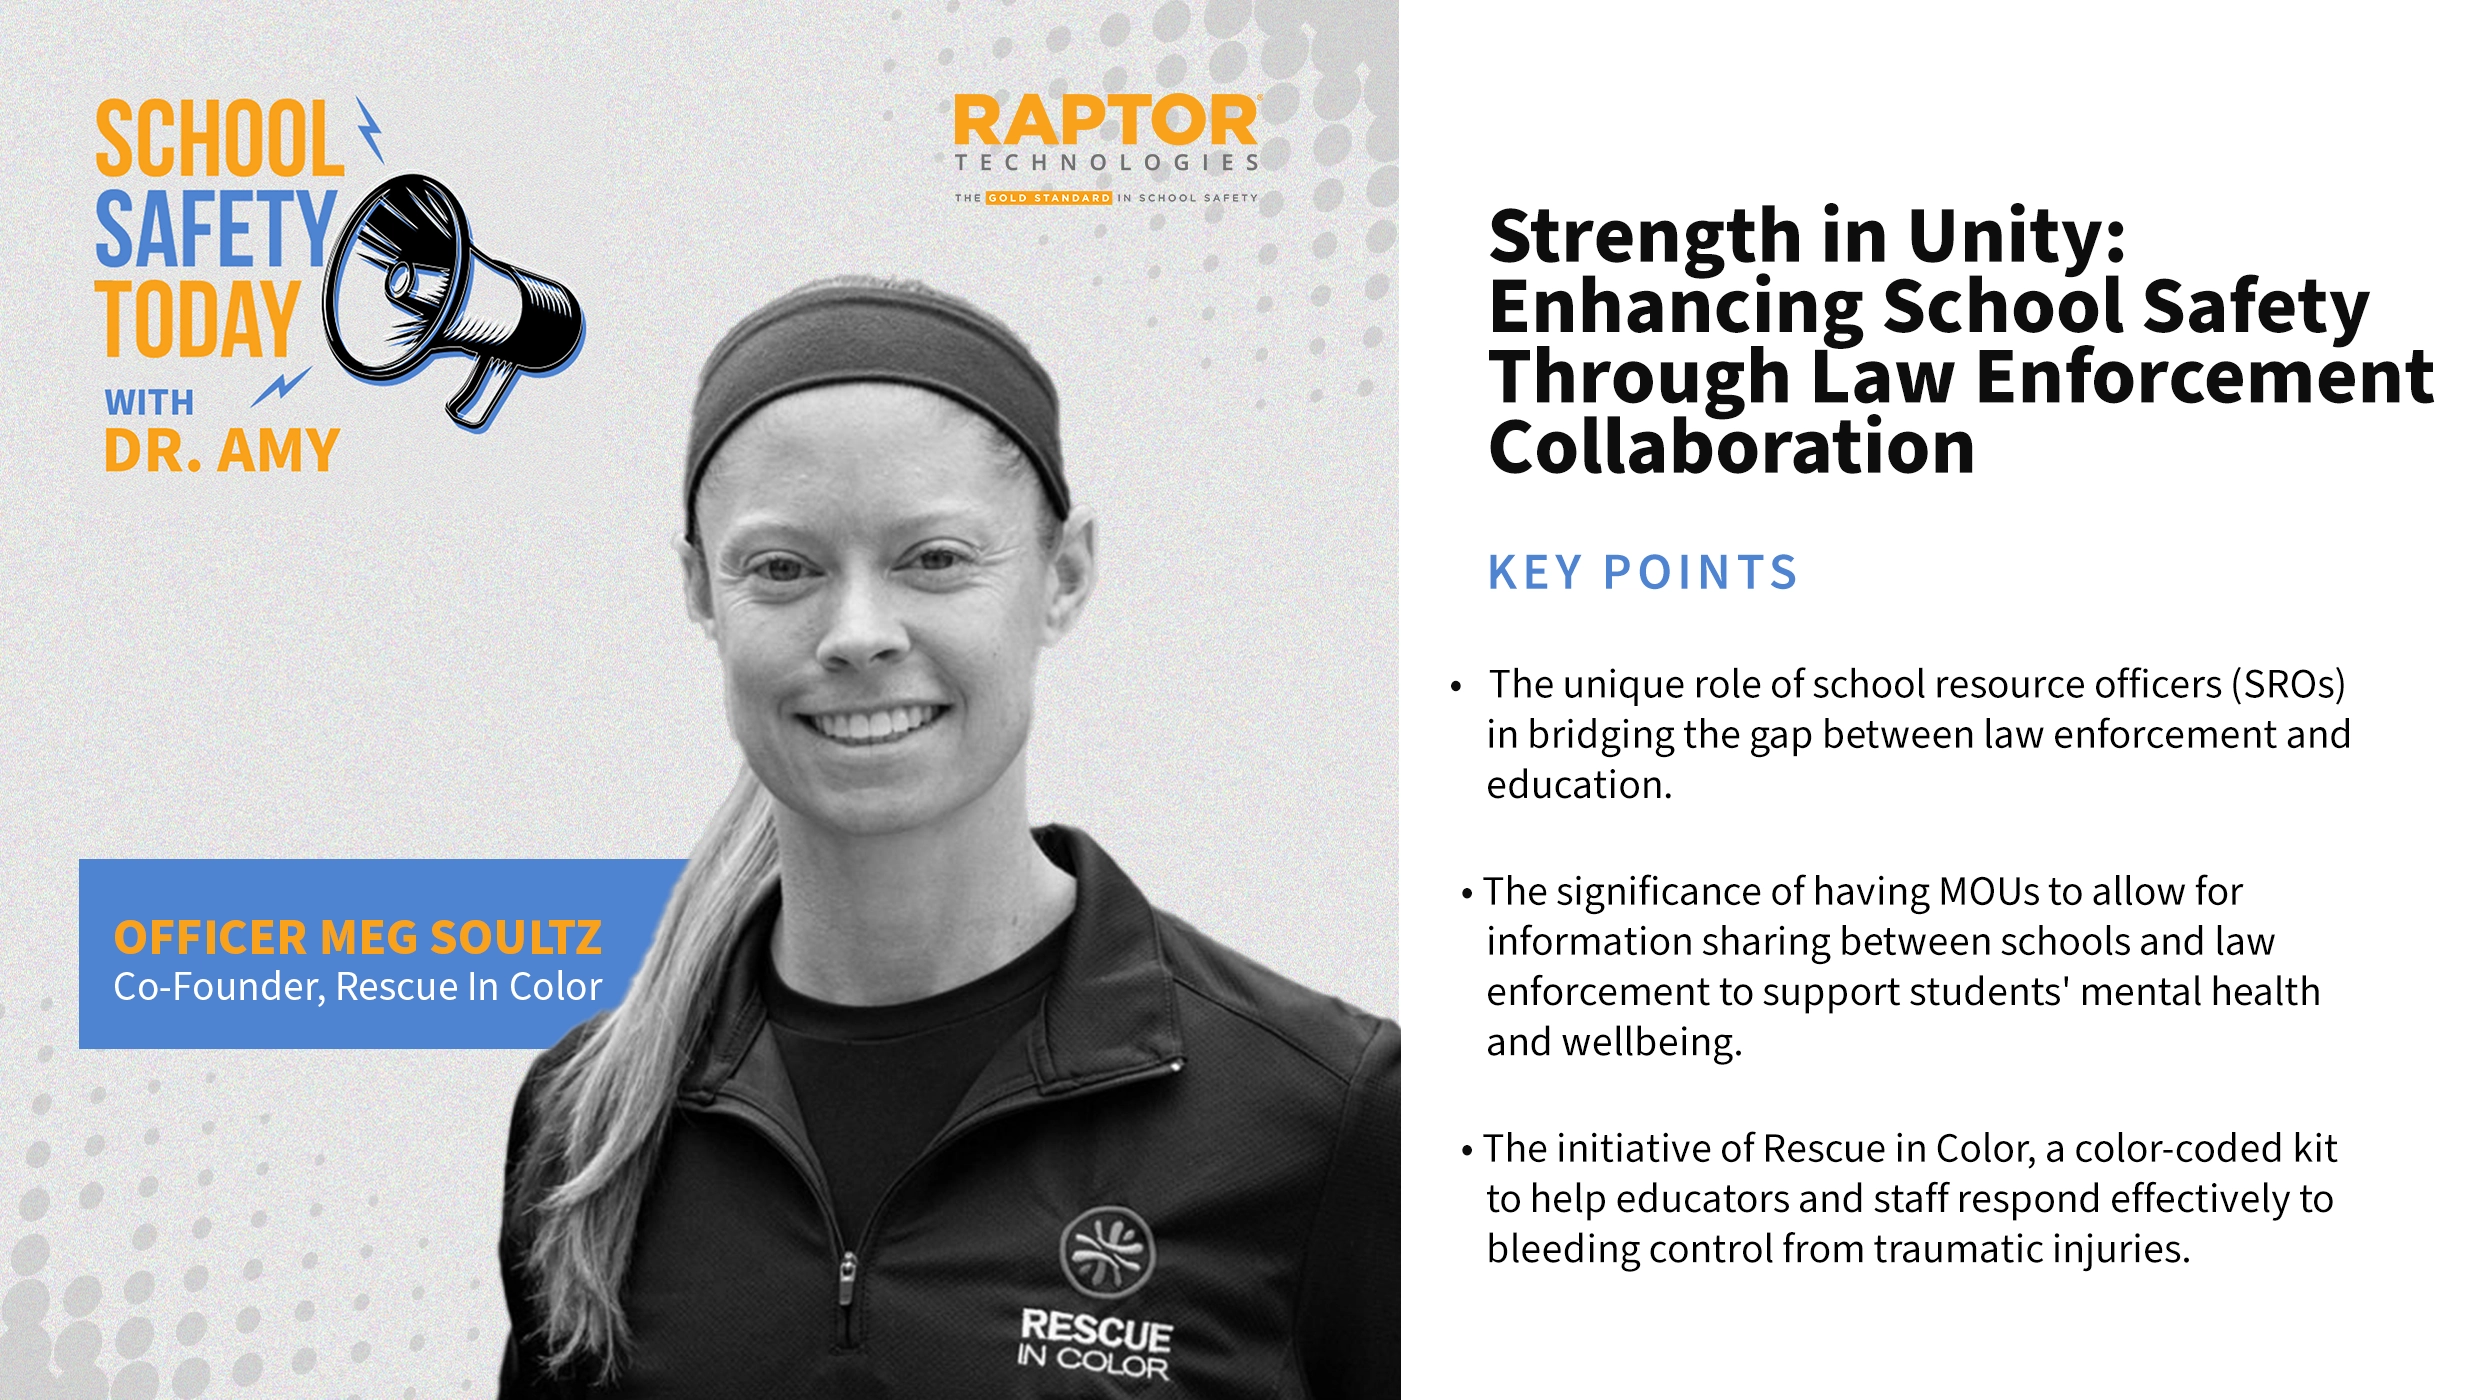 Strength in Unity: Enhancing School Safety Through Law Enforcement Collaboration